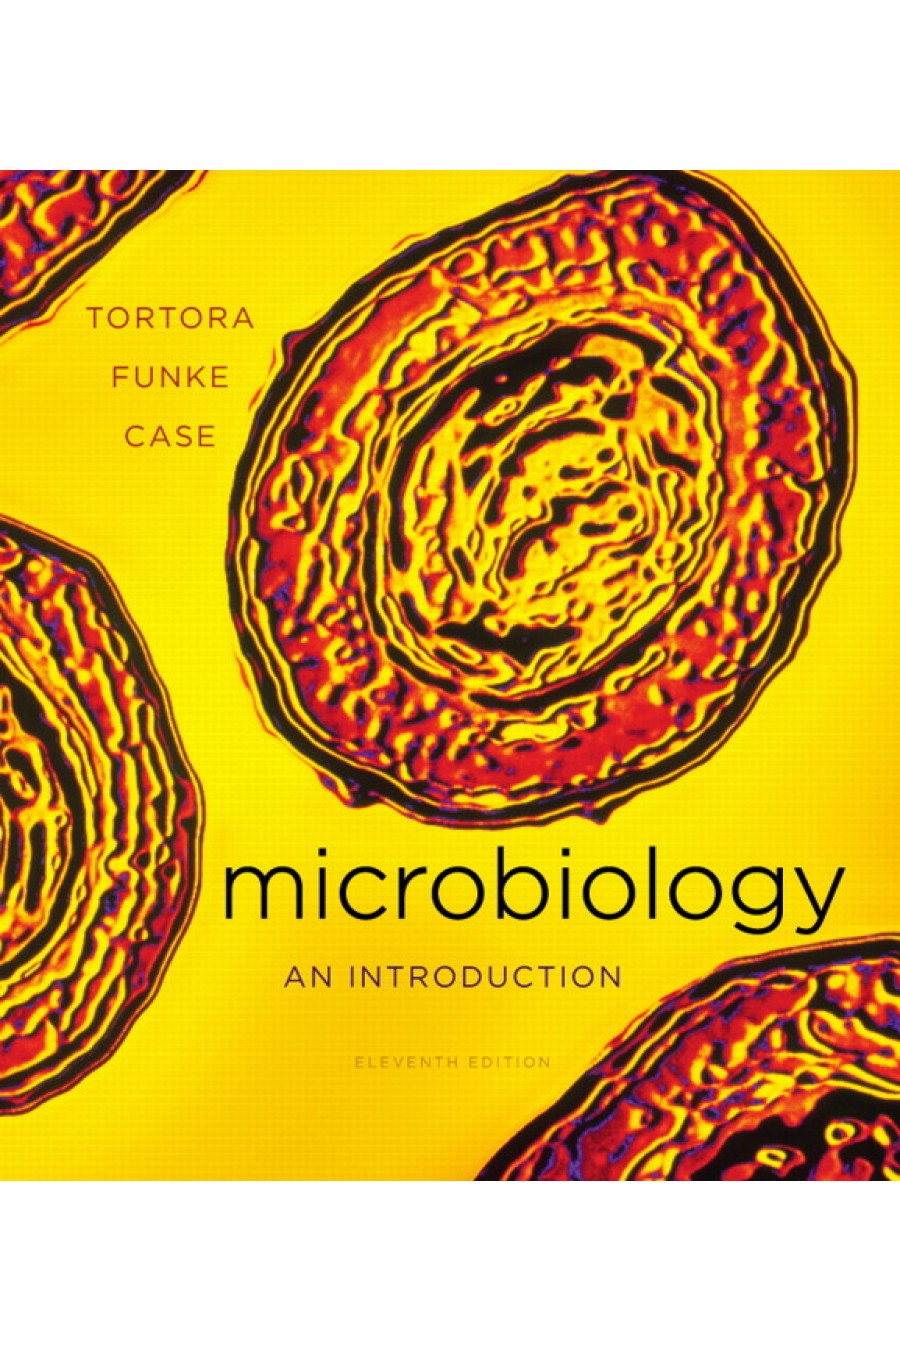 Microbiology An Introduction 11th Edition Pdf Edition Biology Education & Reference